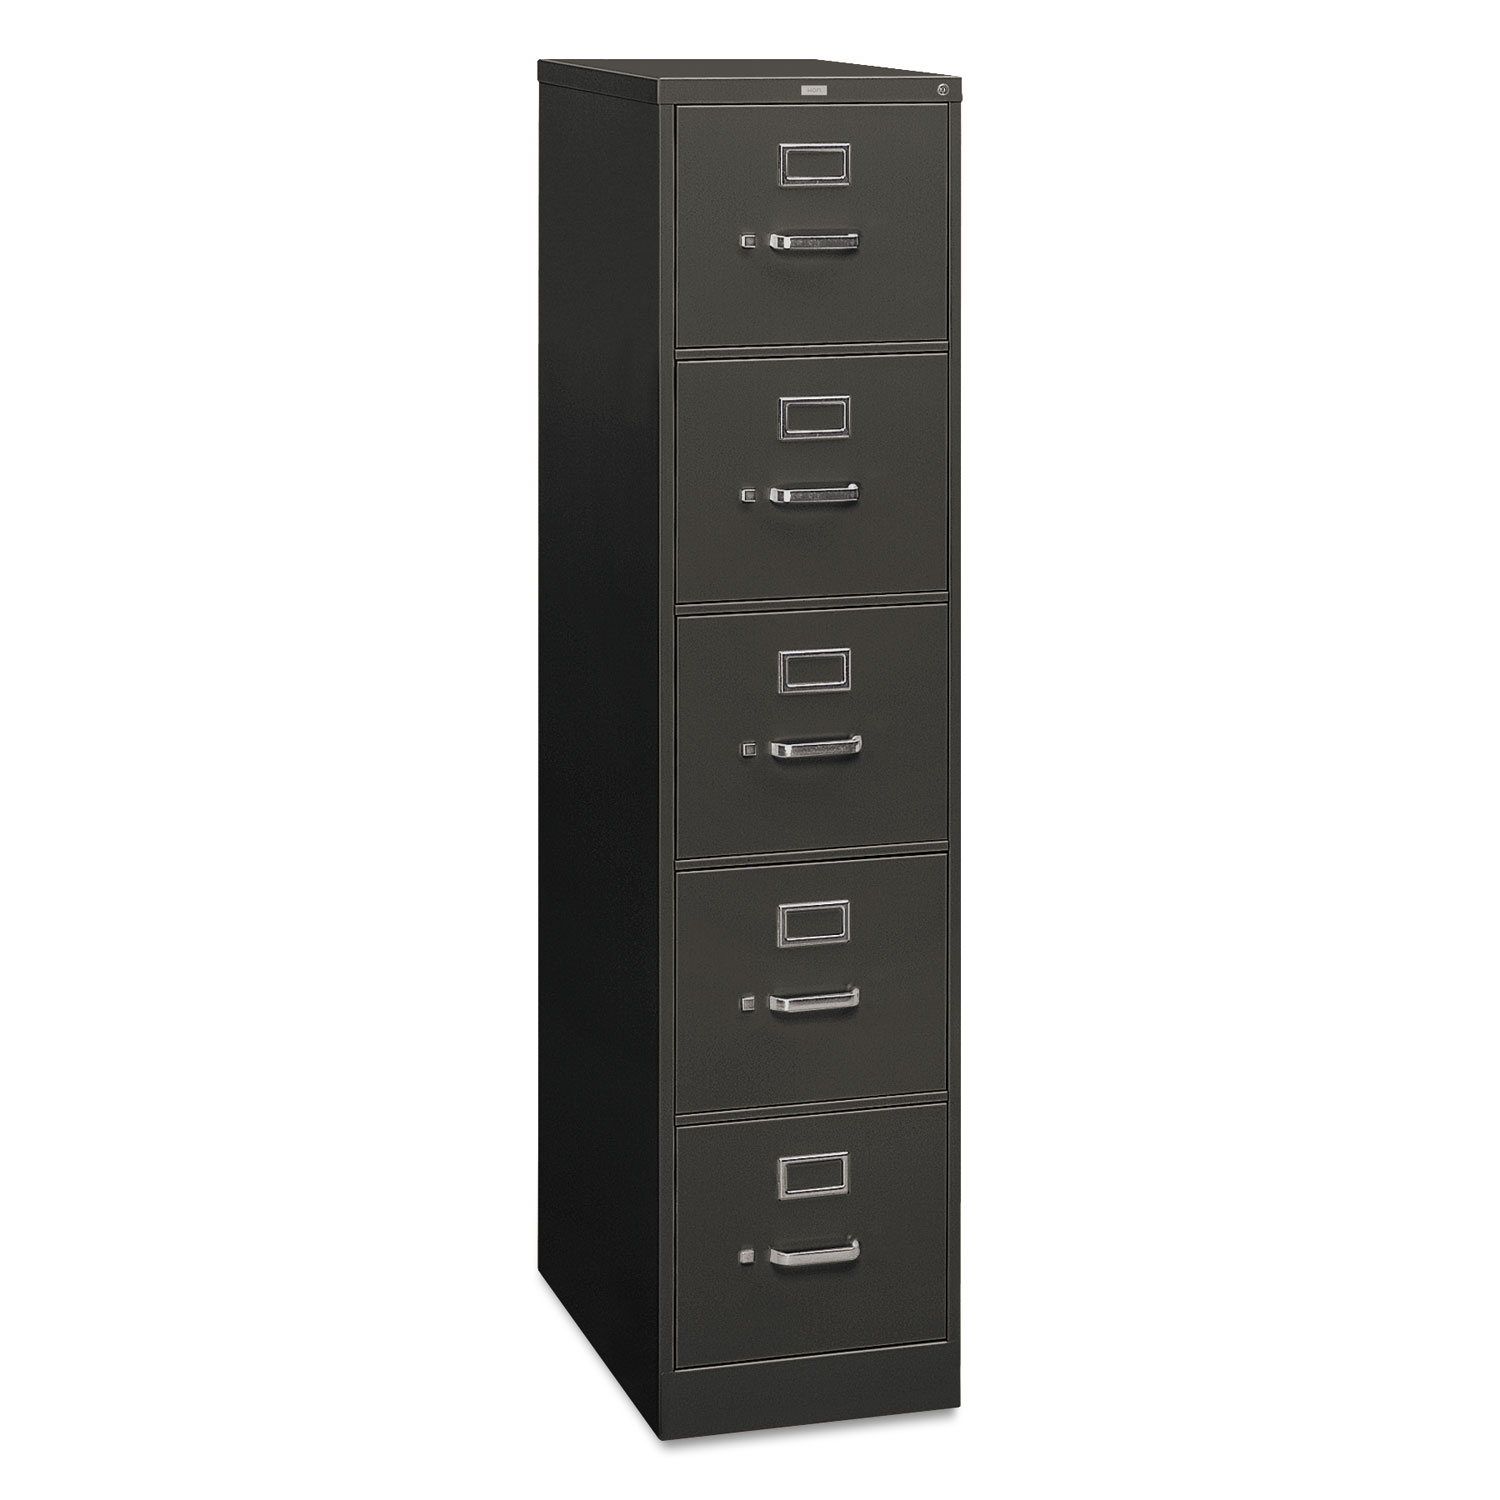 310 Series Five-Drawer, Full-Suspension File, Letter, 26-1/2d, Charcoal